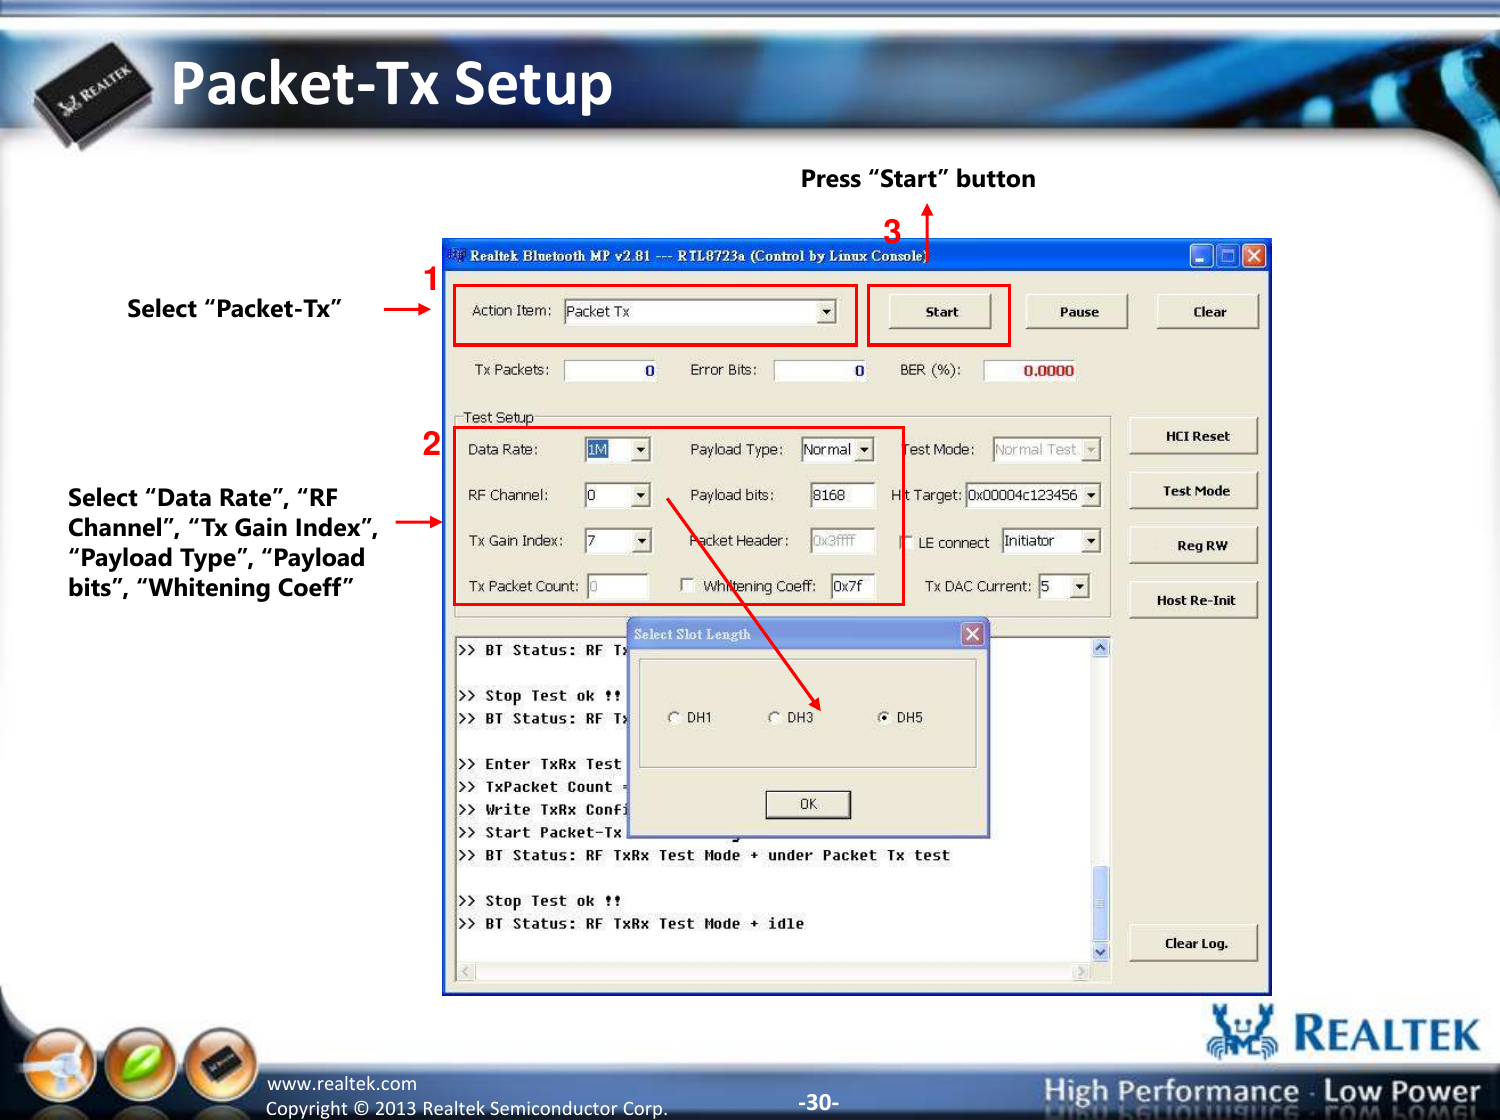 -30- Copyright ©  2013 Realtek Semiconductor Corp. www.realtek.com Packet-Tx Setup Select “Packet-Tx” 1 2 3 Select “Data Rate”, “RF Channel”, “Tx Gain Index”, “Payload Type”, “Payload bits”, “Whitening Coeff” Press “Start” button 